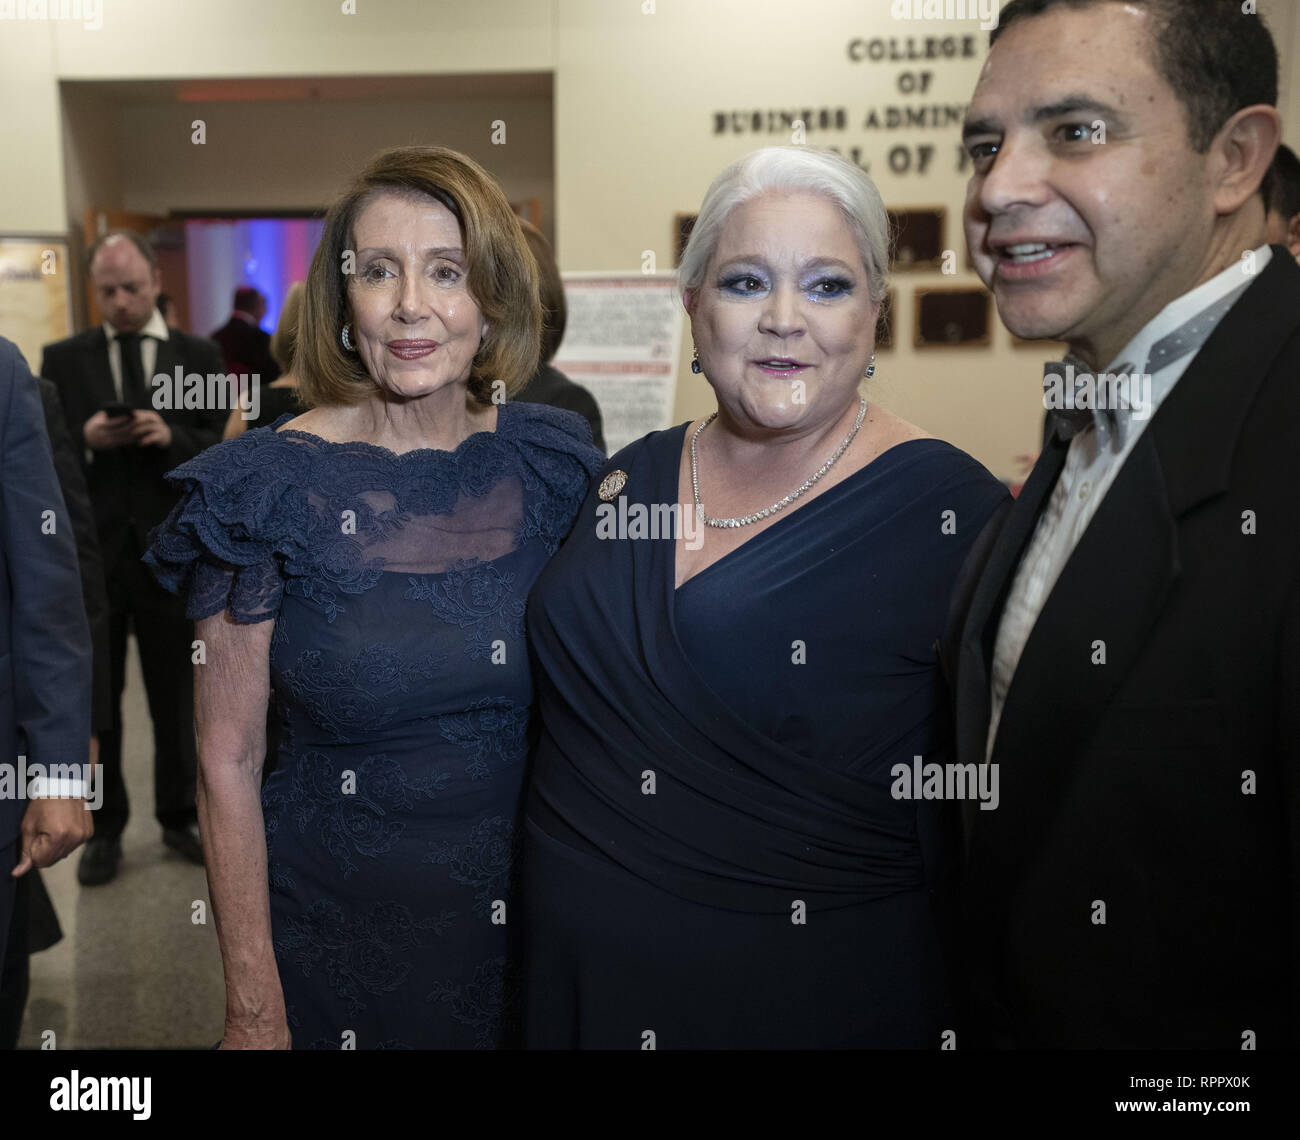 Laredo, TX, USA. 22nd Feb, 2019. Laredo, Texas Feb. 22, 2019: House Speaker Nancy Pelosi poses with guests at the Los Caballeros de la Republica del Rio Grande cocktail party as an honored guest of the George Washington's Birthday celebration in this border city. Pelosi toured the Rio Grande River earlier in the day. At right is Congressman Henry Cuellar, D-Laredo. Credit: Bob Daemmrich/ZUMA Wire/Alamy Live News Stock Photo